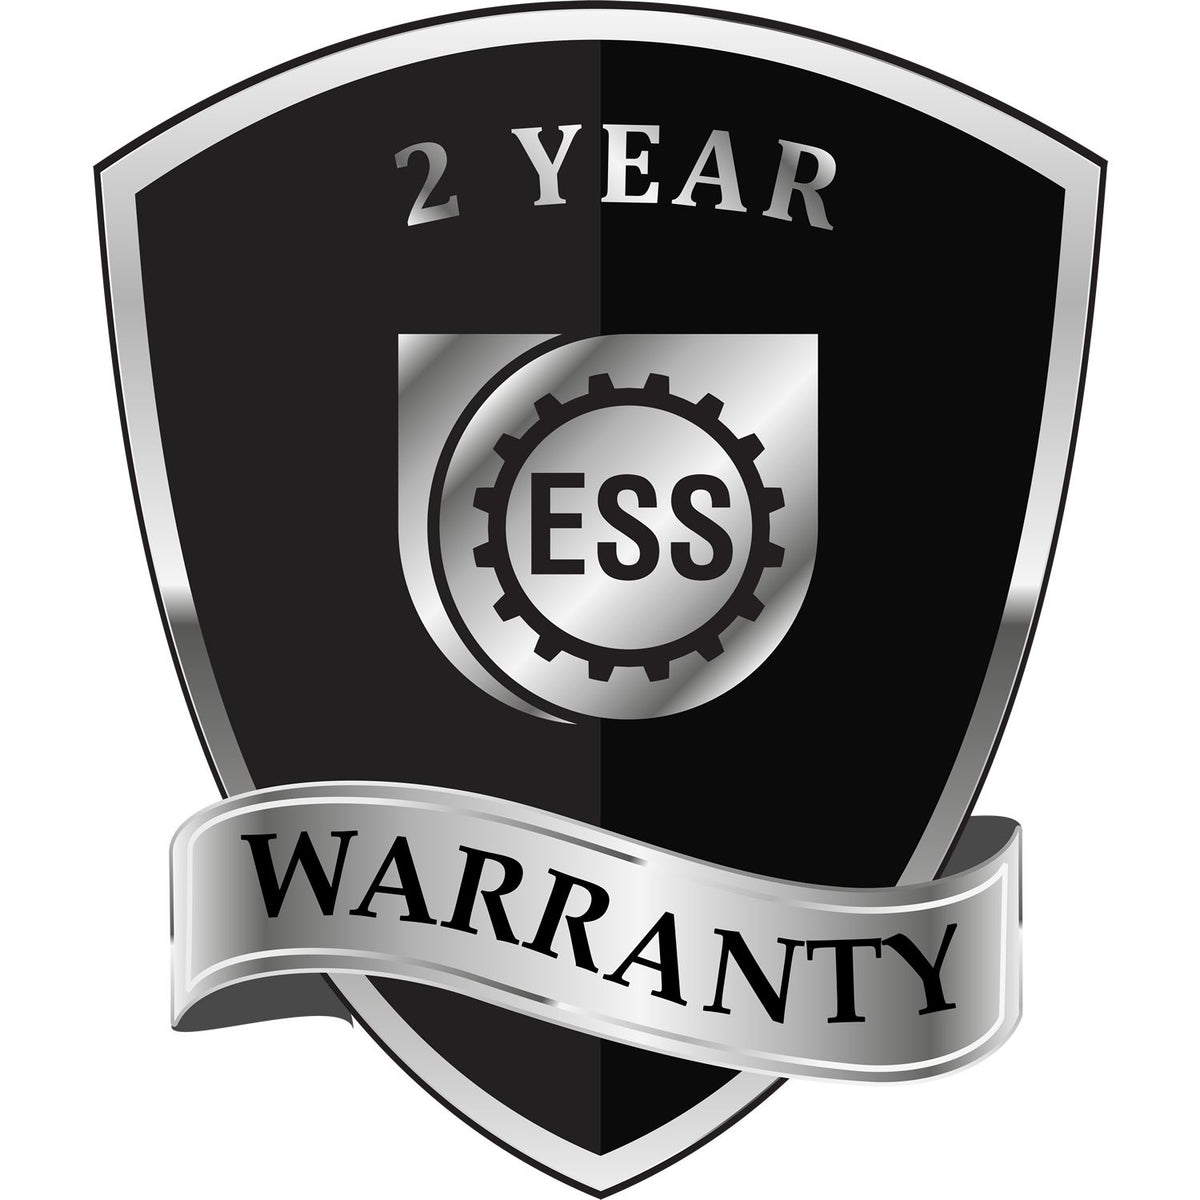 A black and silver badge or emblem showing warranty information for the Heavy Duty Cast Iron South Carolina Geologist Seal Embosser